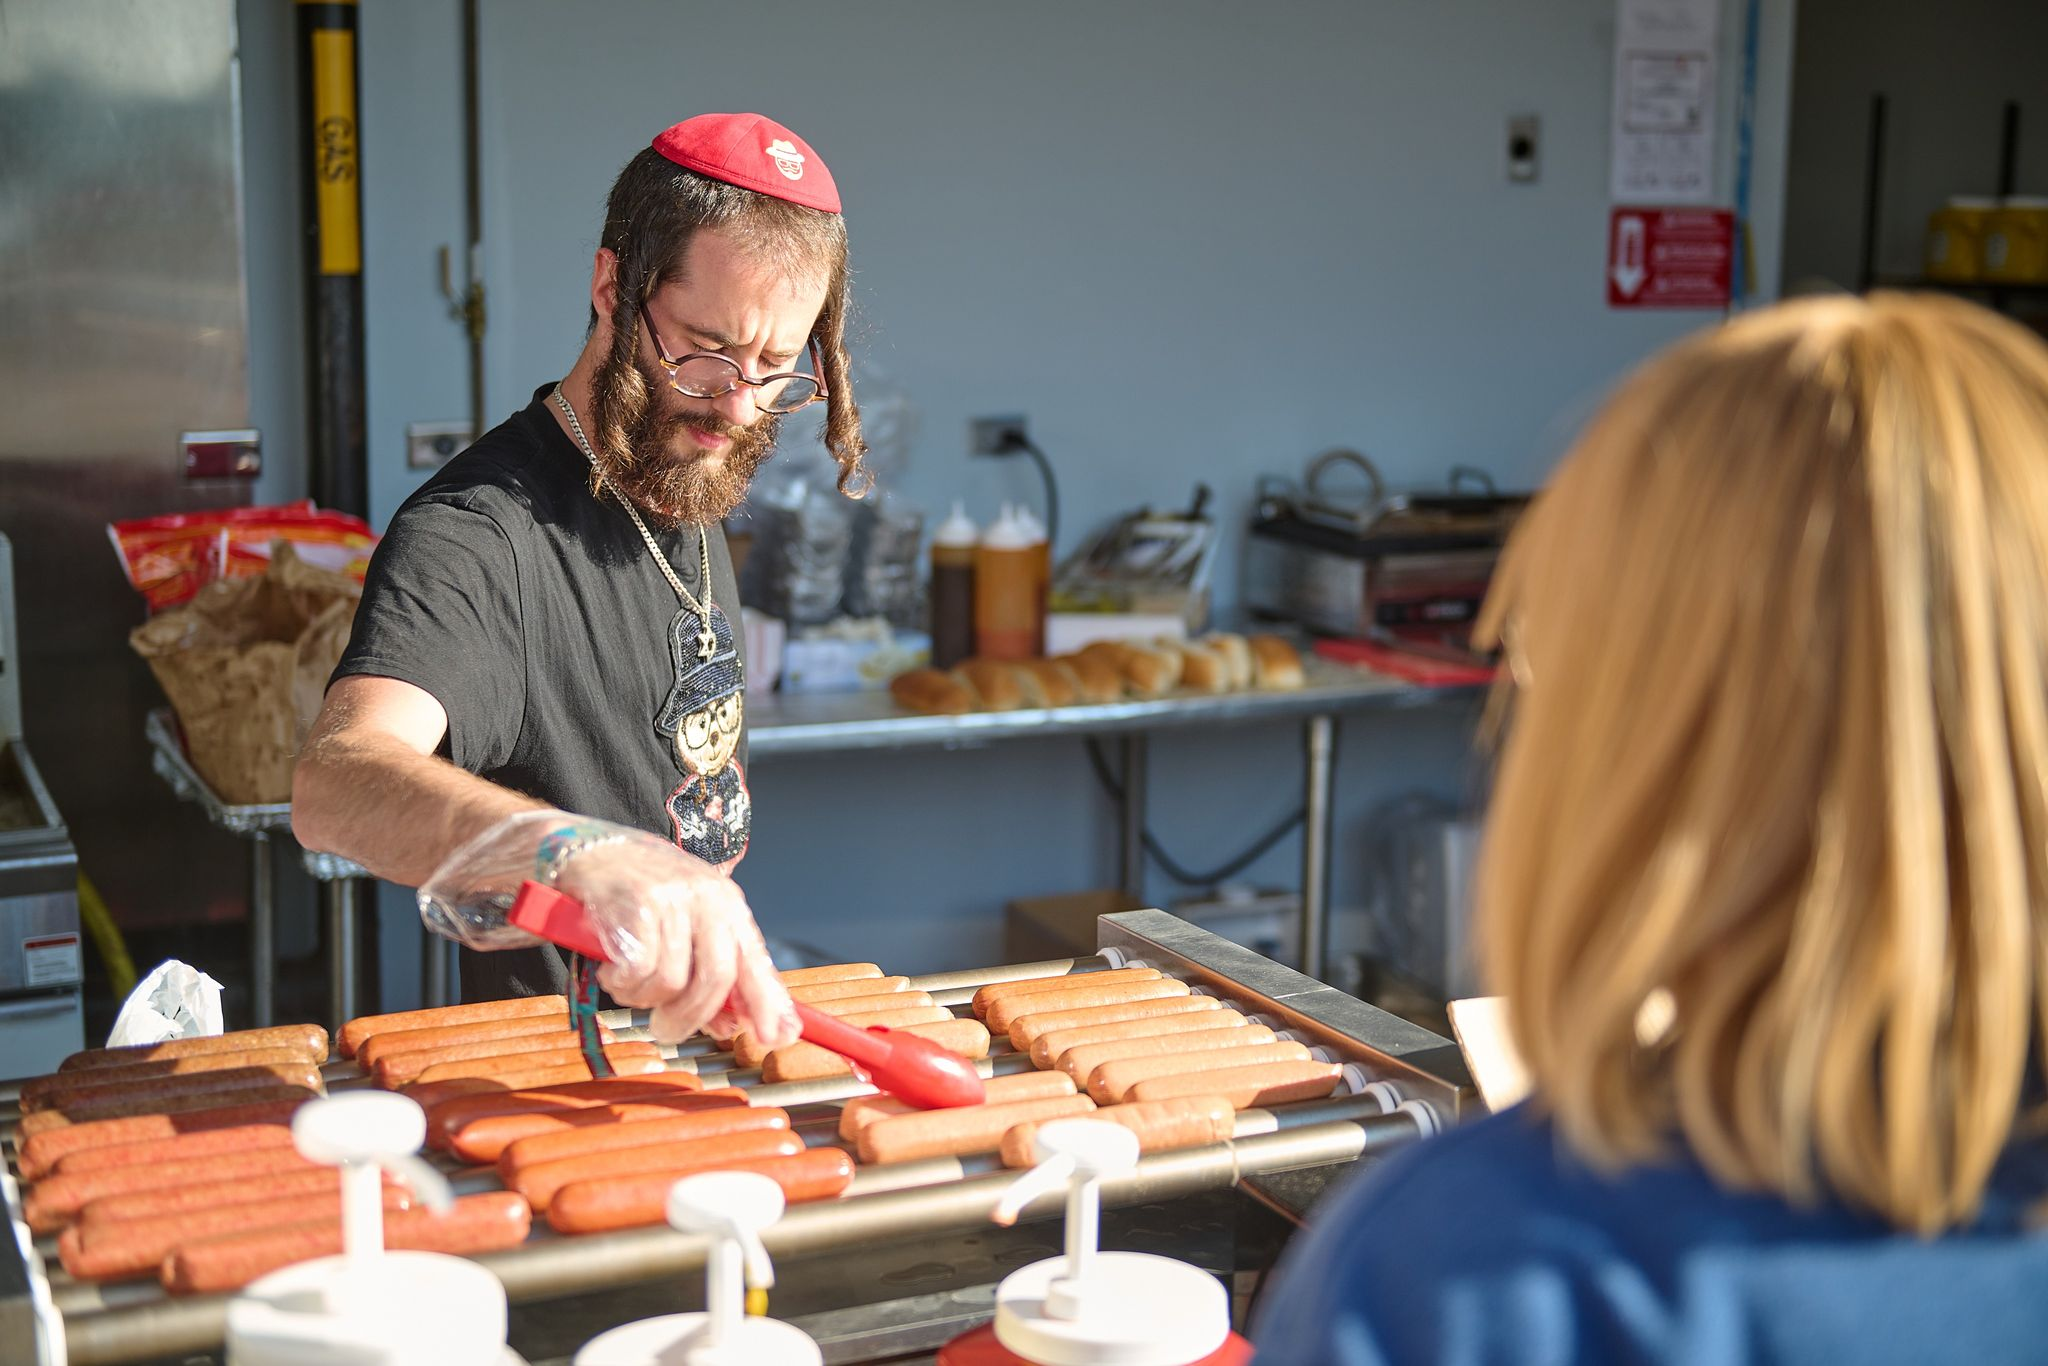 Chaim Lungar of Pomona, N.Y., serves up kosher hot dogs at Clover Stadium in Rockland County, N.Y., where the New York Boulders played the Evansville Otters on Jewish Heritage Day, July 30, 2023. Photo by Perry Bindelglass.